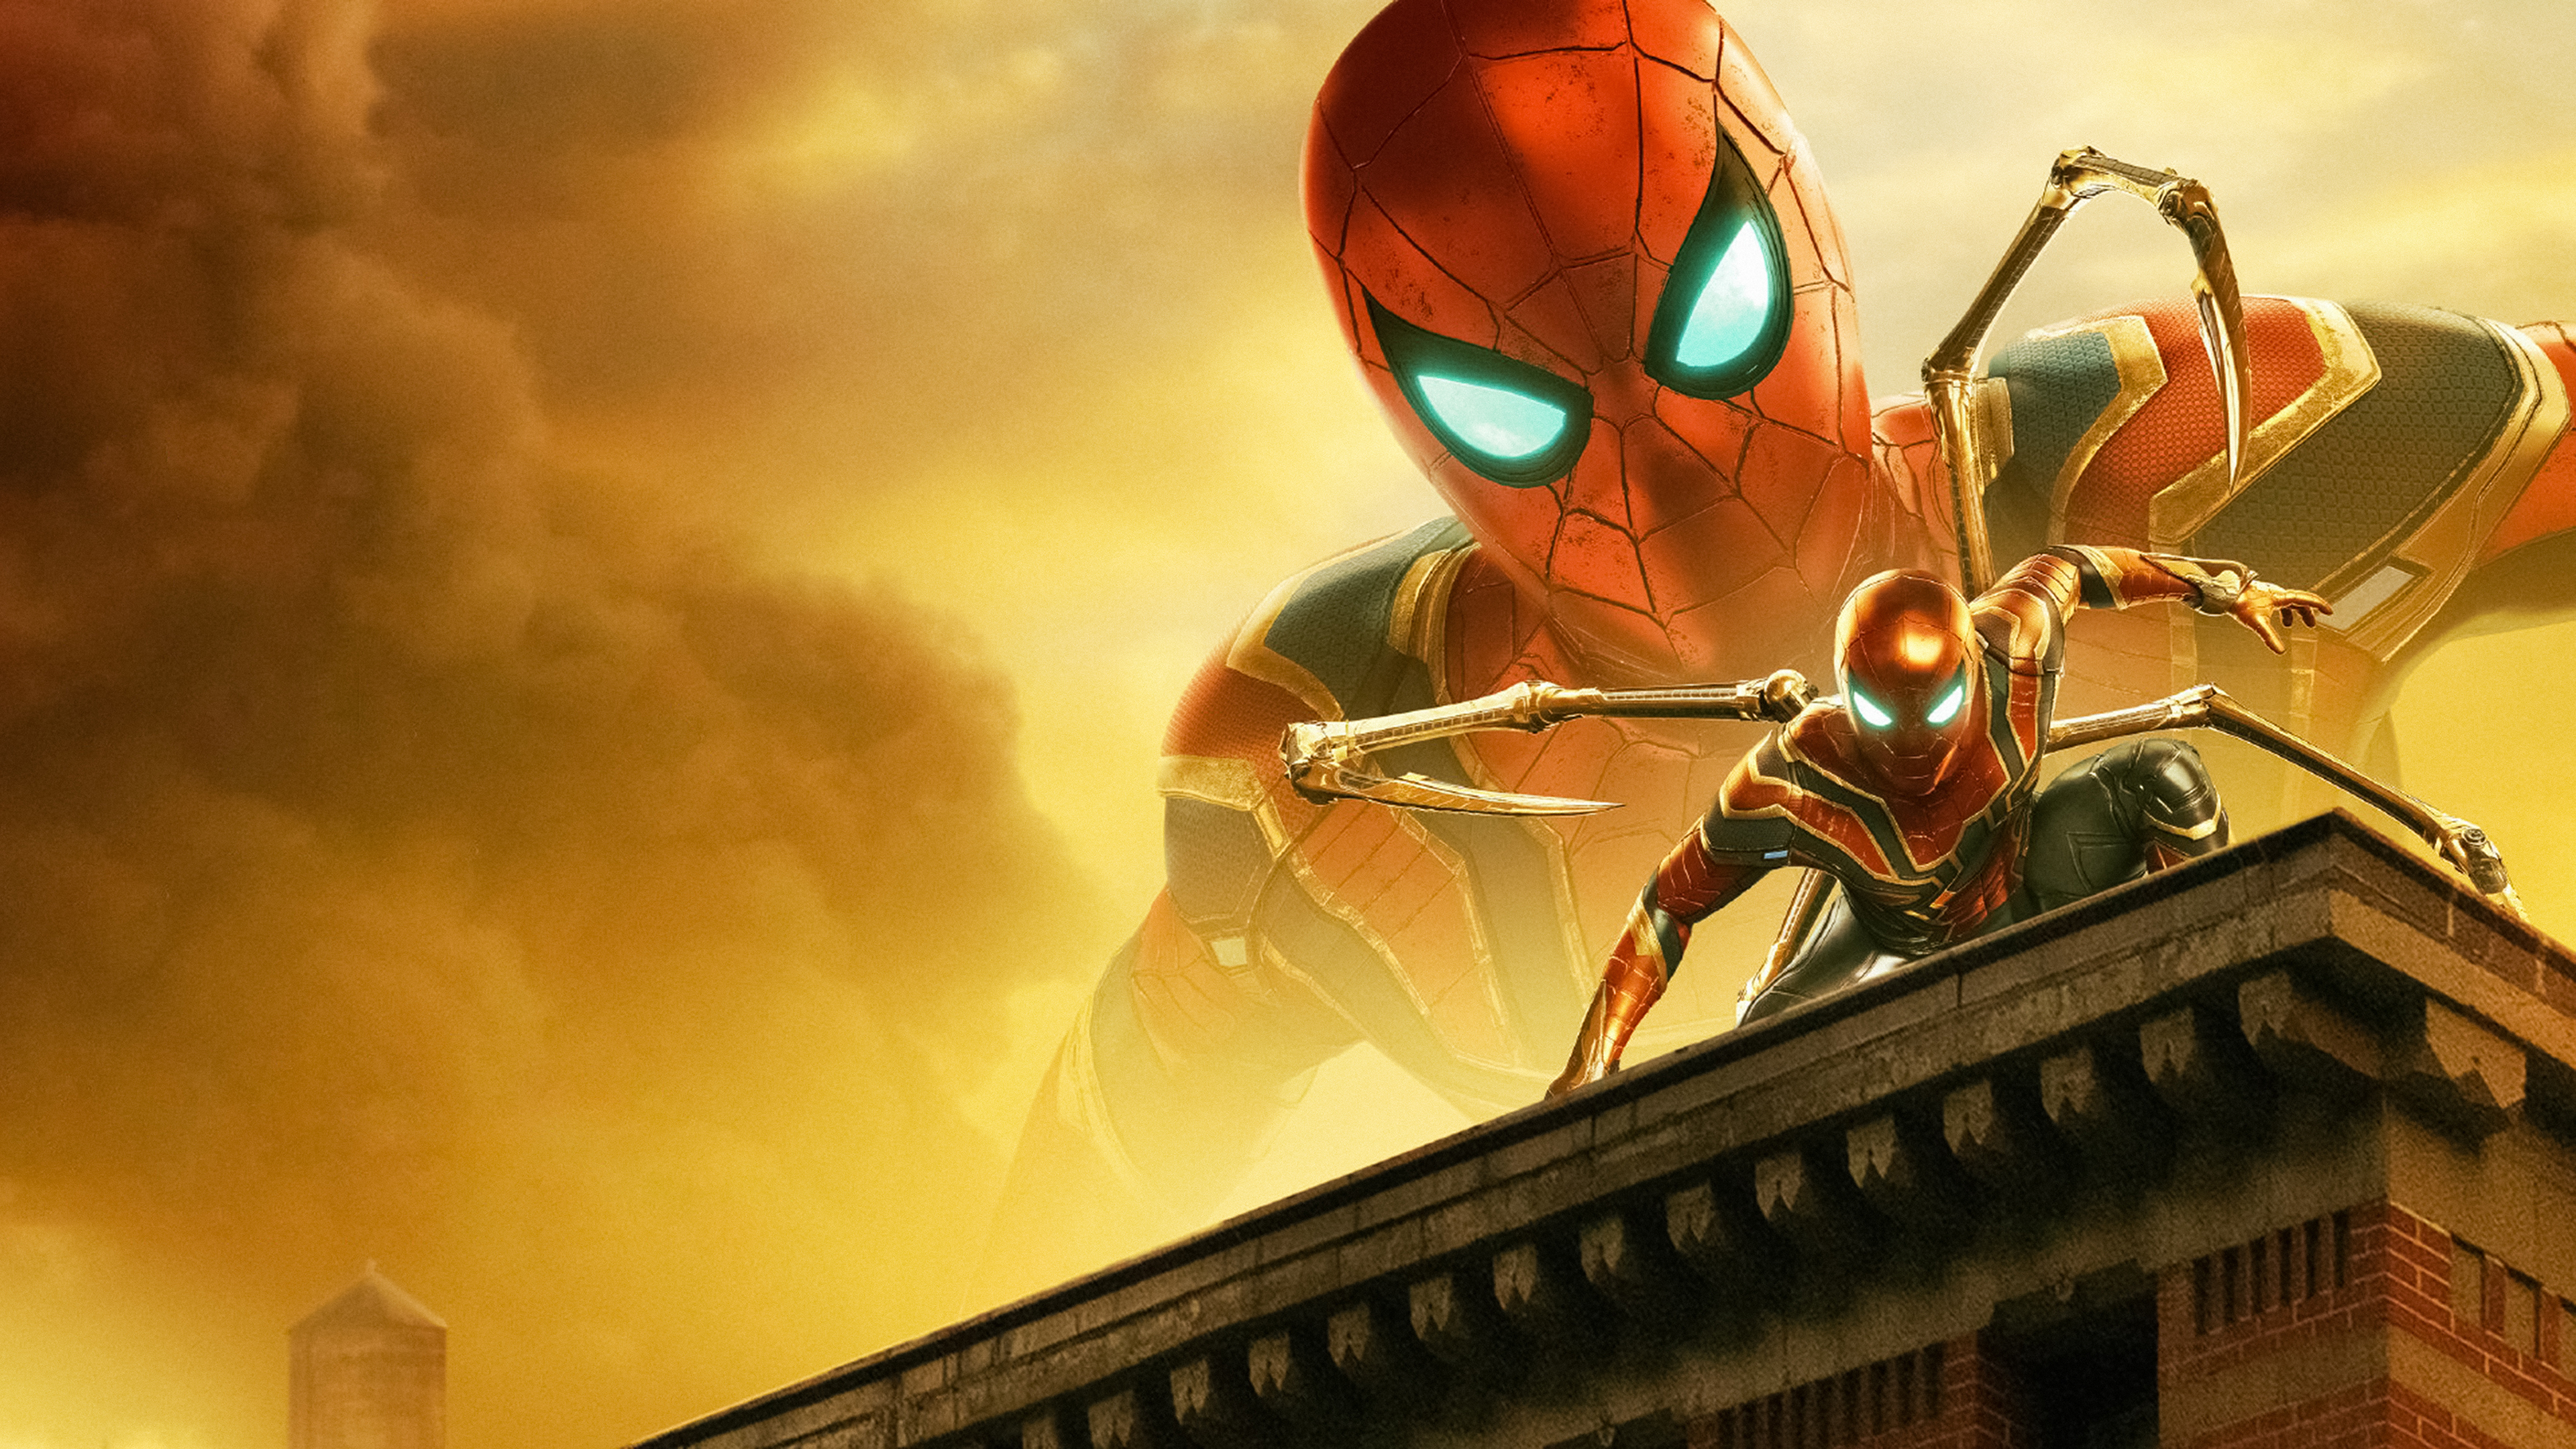 Iron Spider in Spider-Man Far From Home 4K Wallpapers | HD Wallpapers